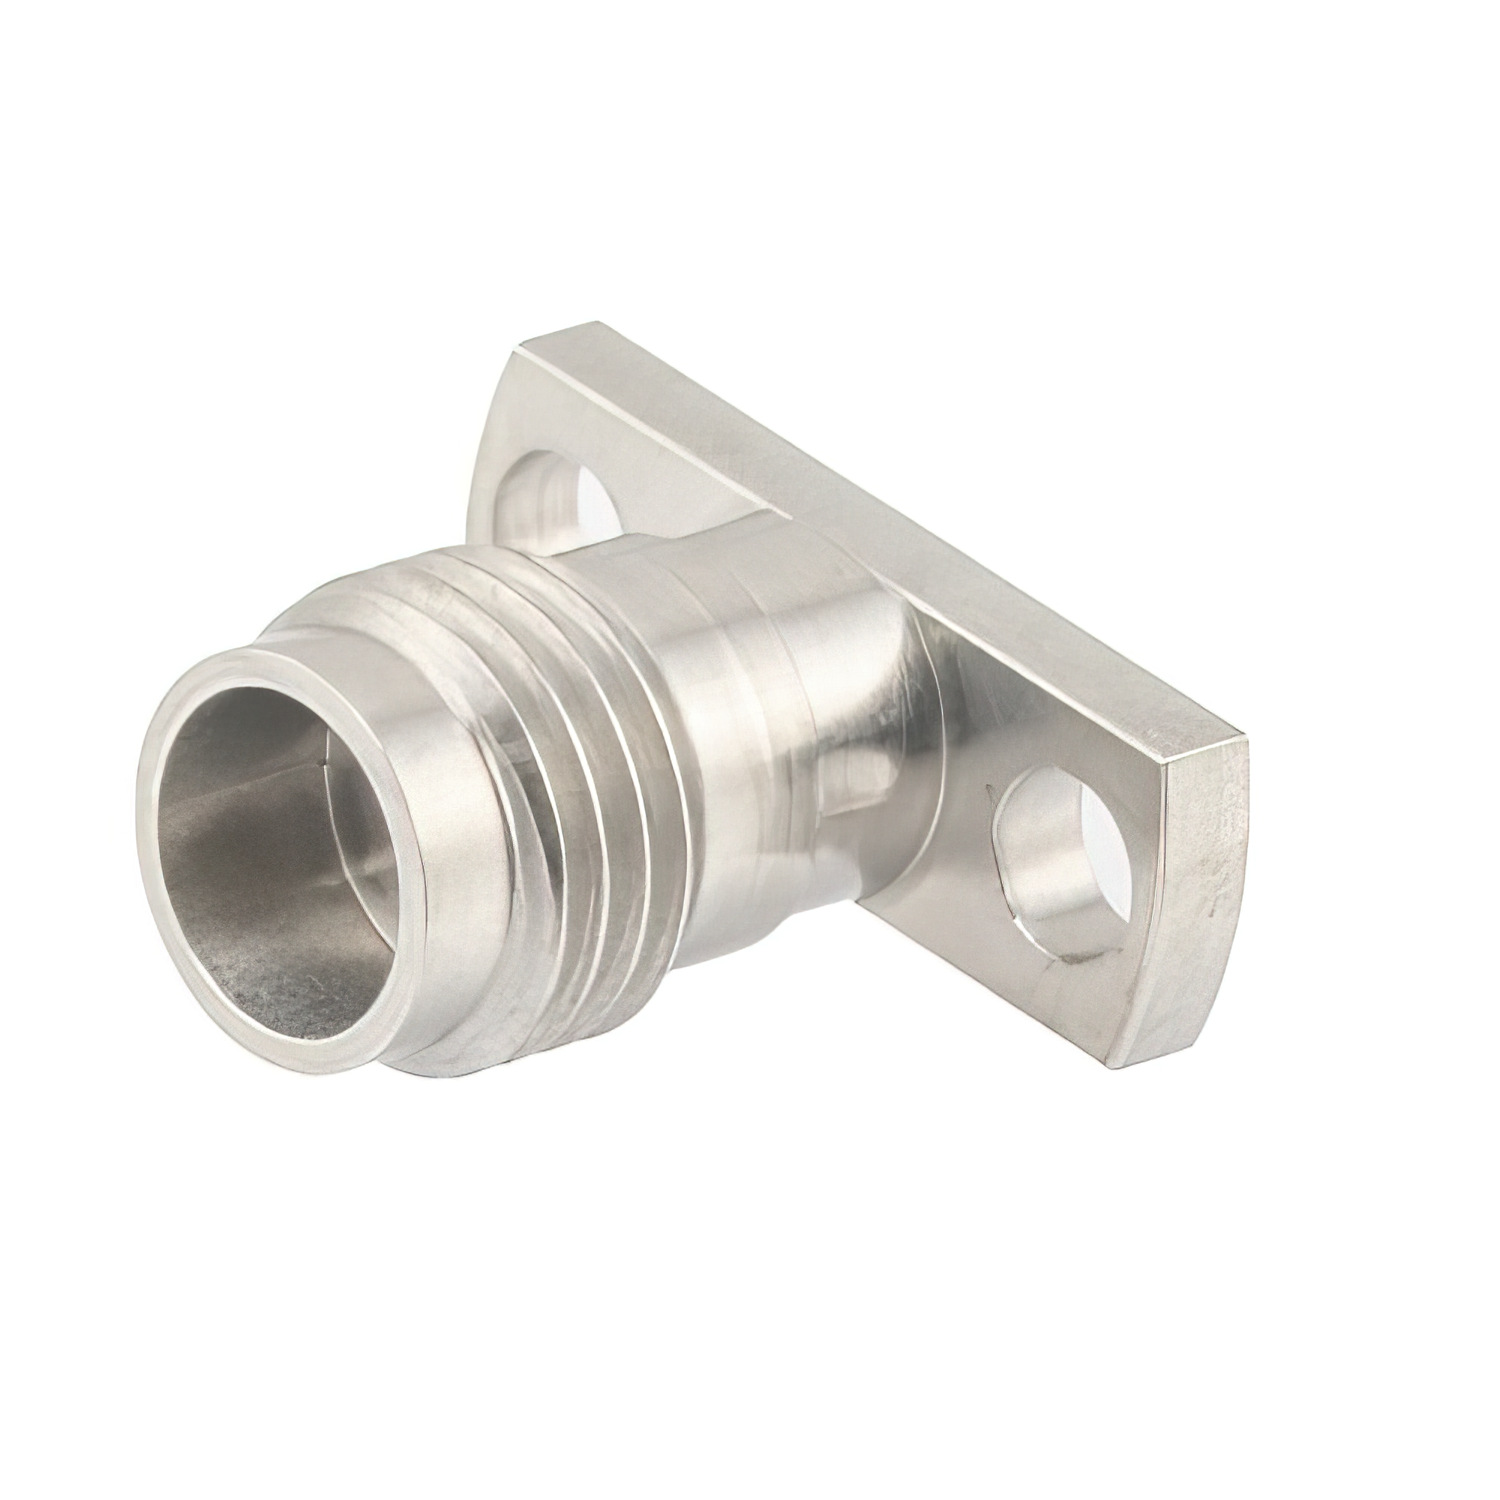 1.85mm Female Field Replaceable Connector 2 Hole Flange Mount 3